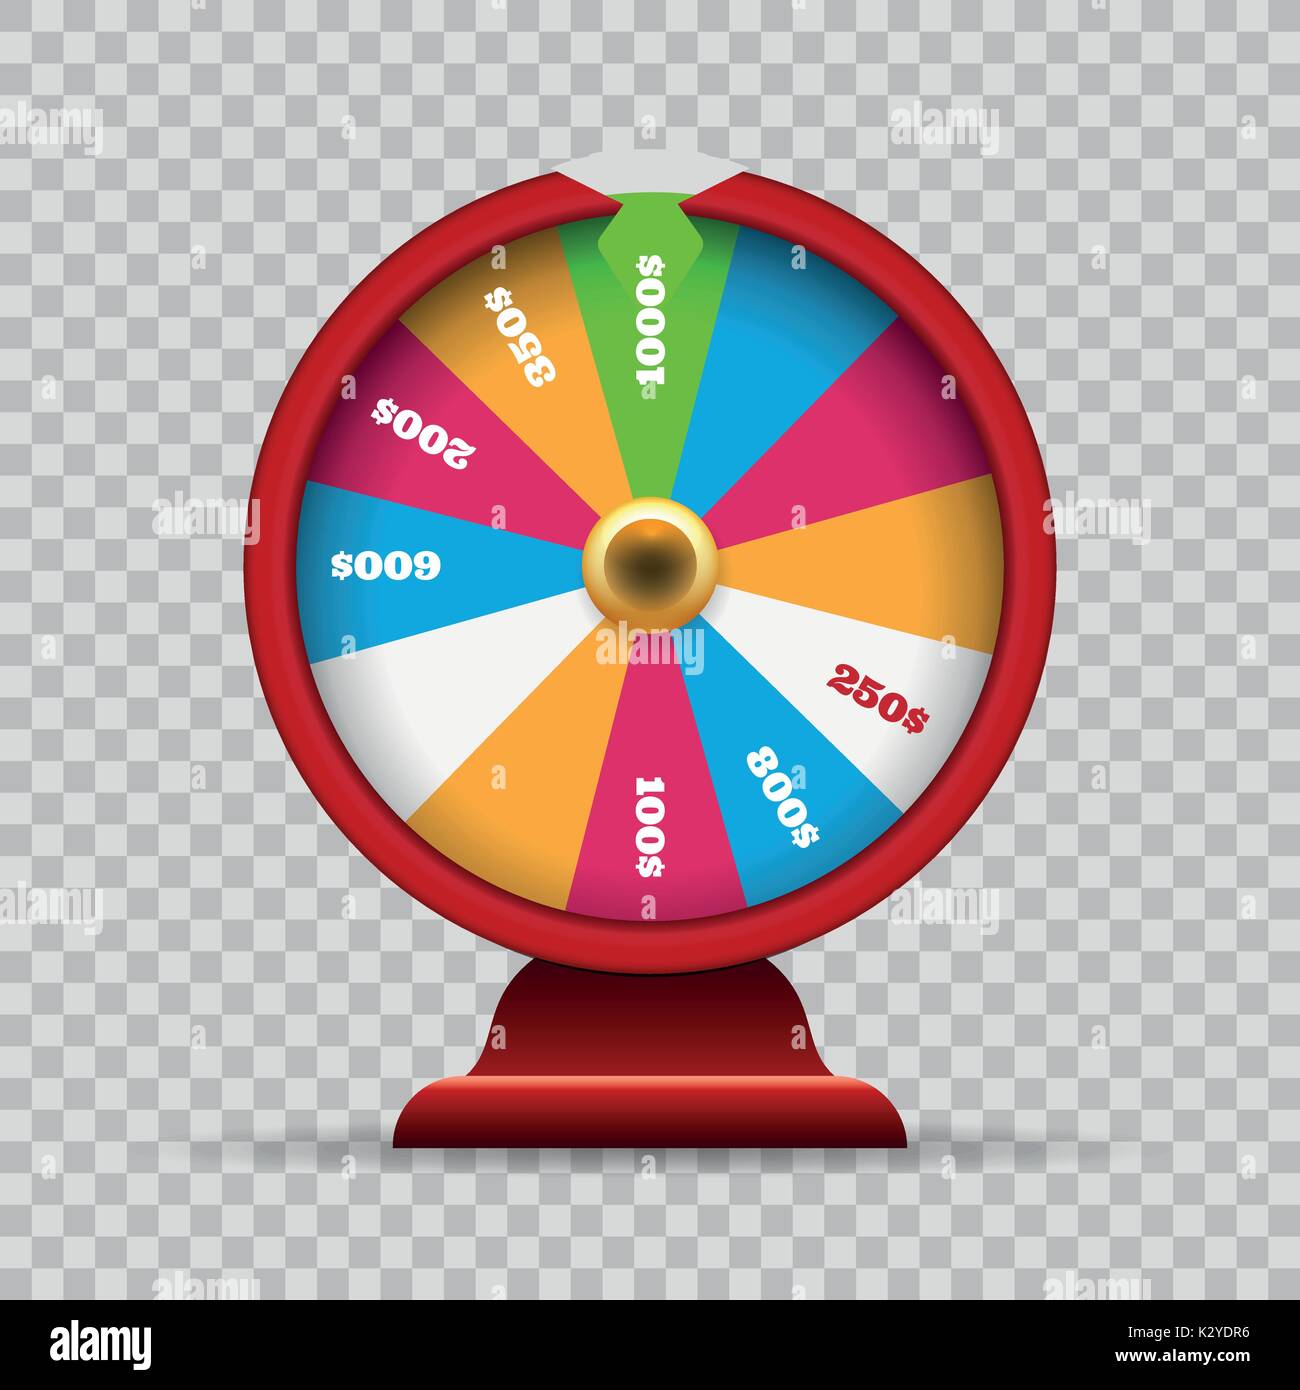 Luck Wheel Of Fortune Or Lottery Spinning Game On Transparency